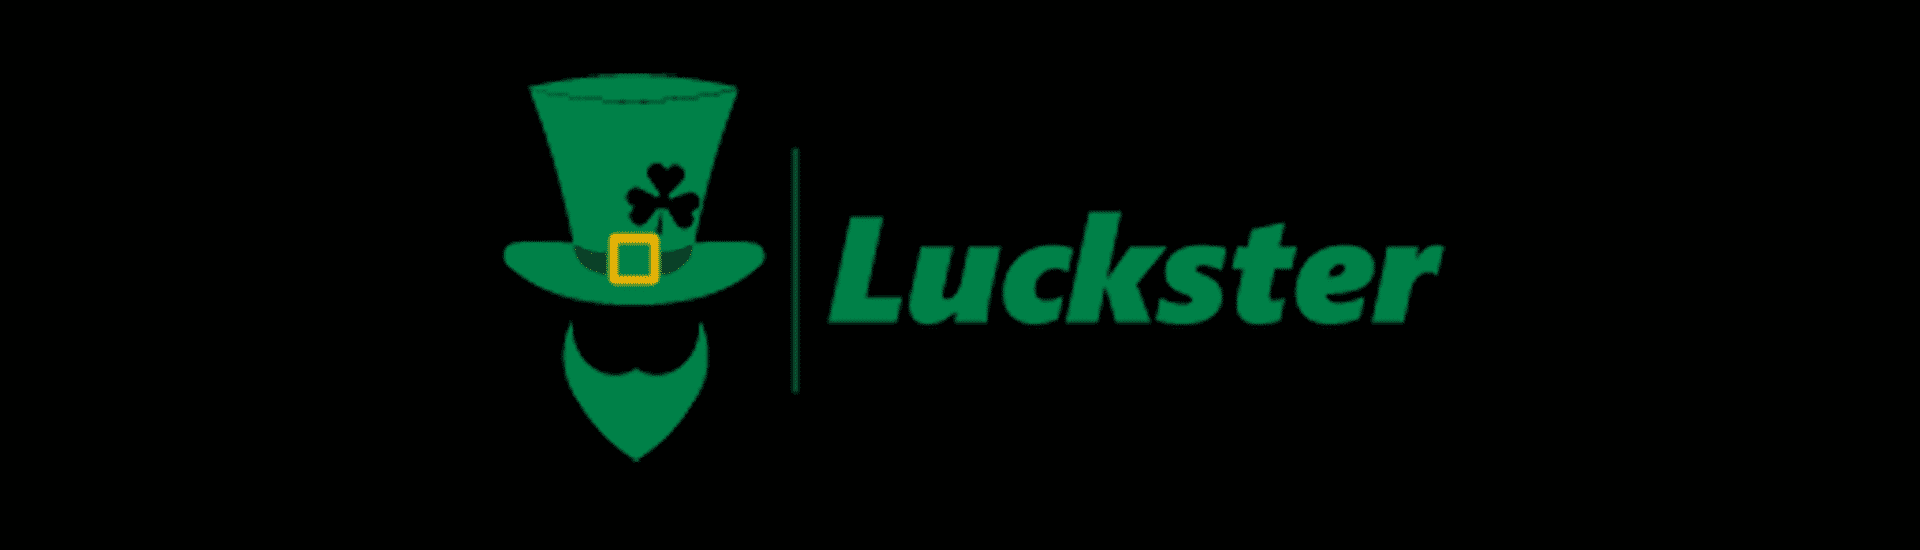 Luckster Featured Image